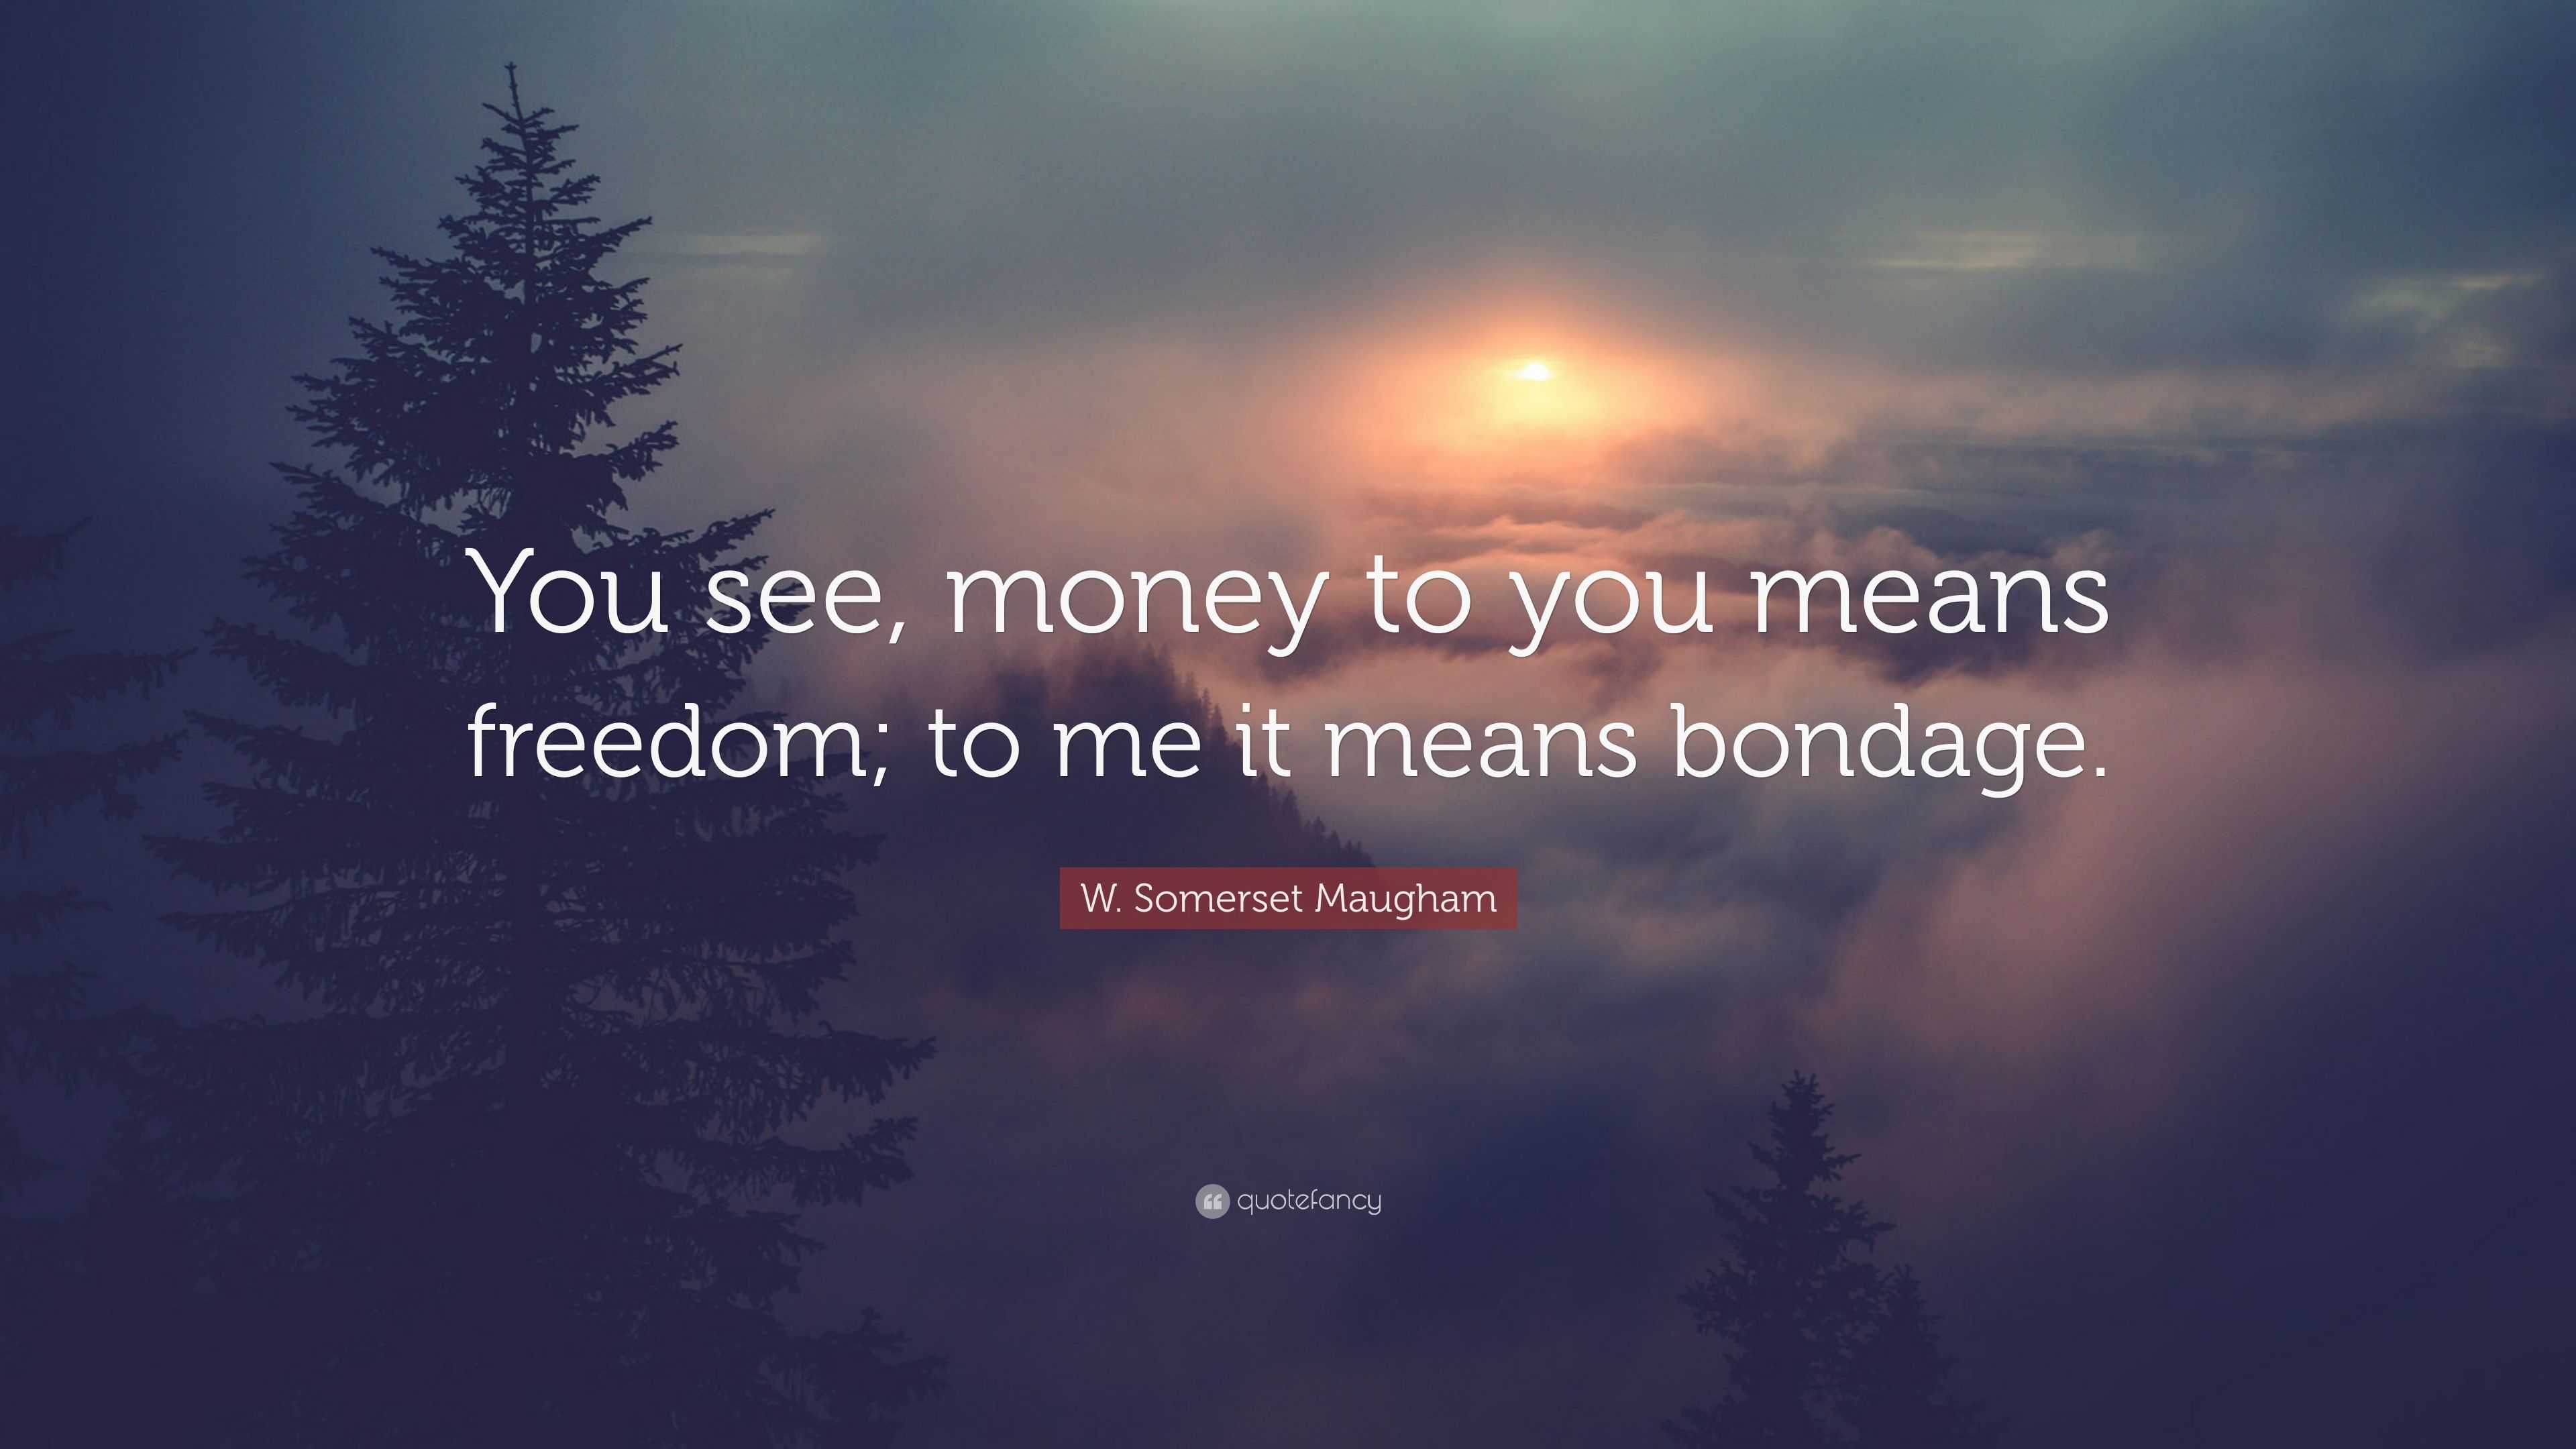 W. Somerset Maugham Quote: “You see, money to you means freedom